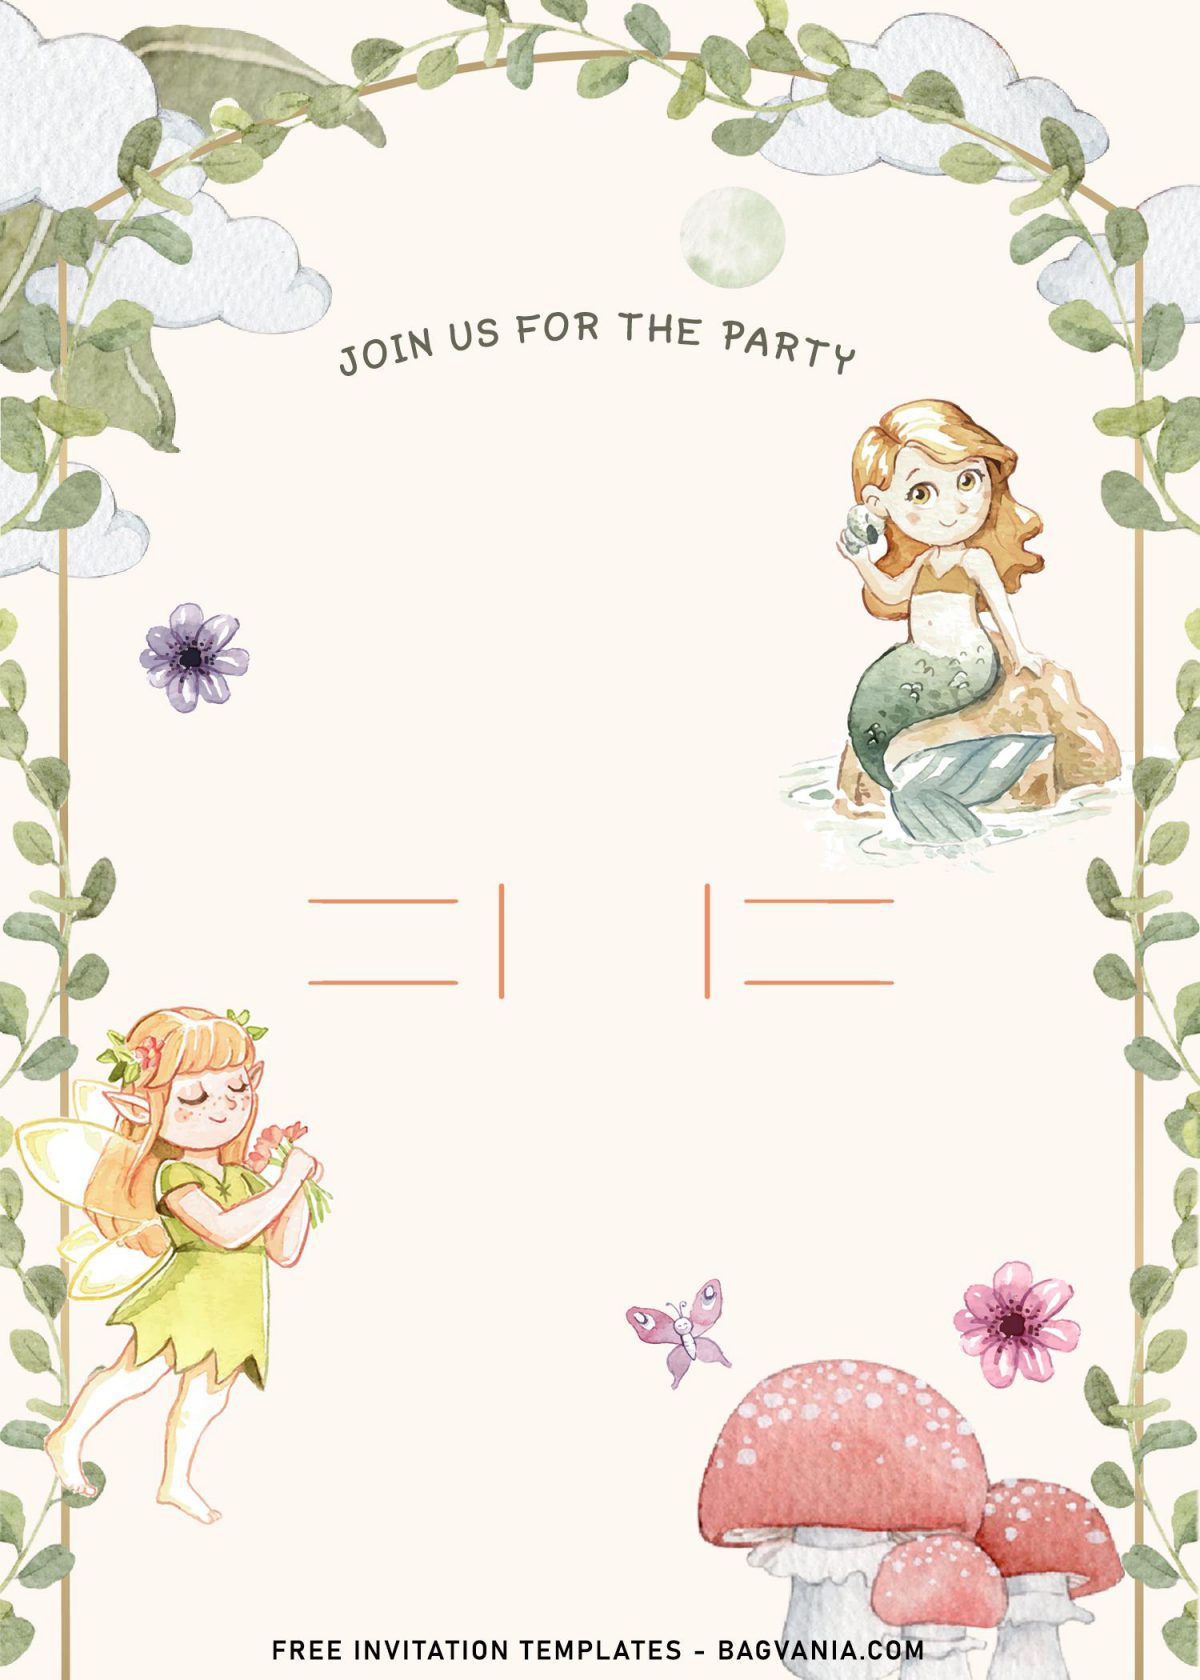 7+ Fairy Tale Birthday Invitation Templates and has butterfly